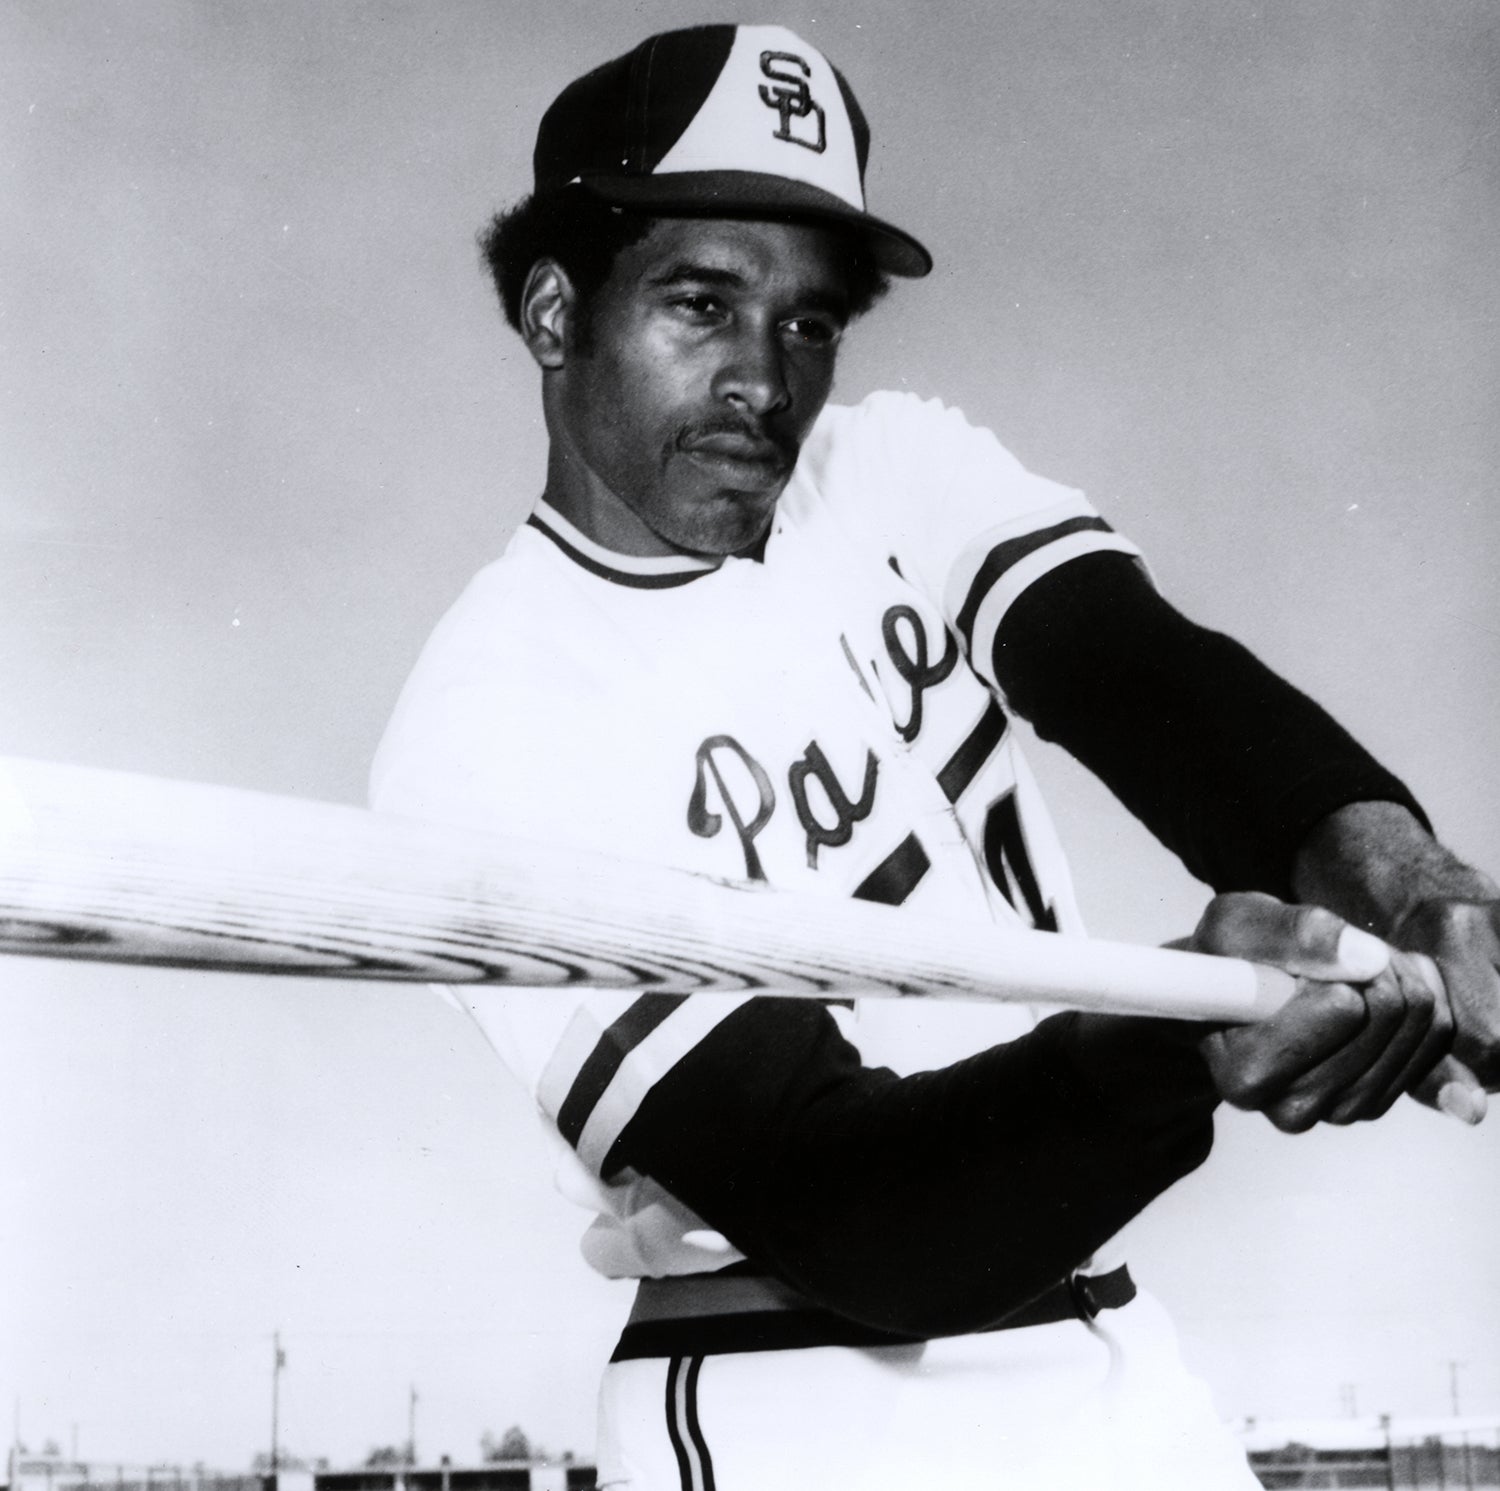 #Shortstops: Dave Winfield still towers over the game